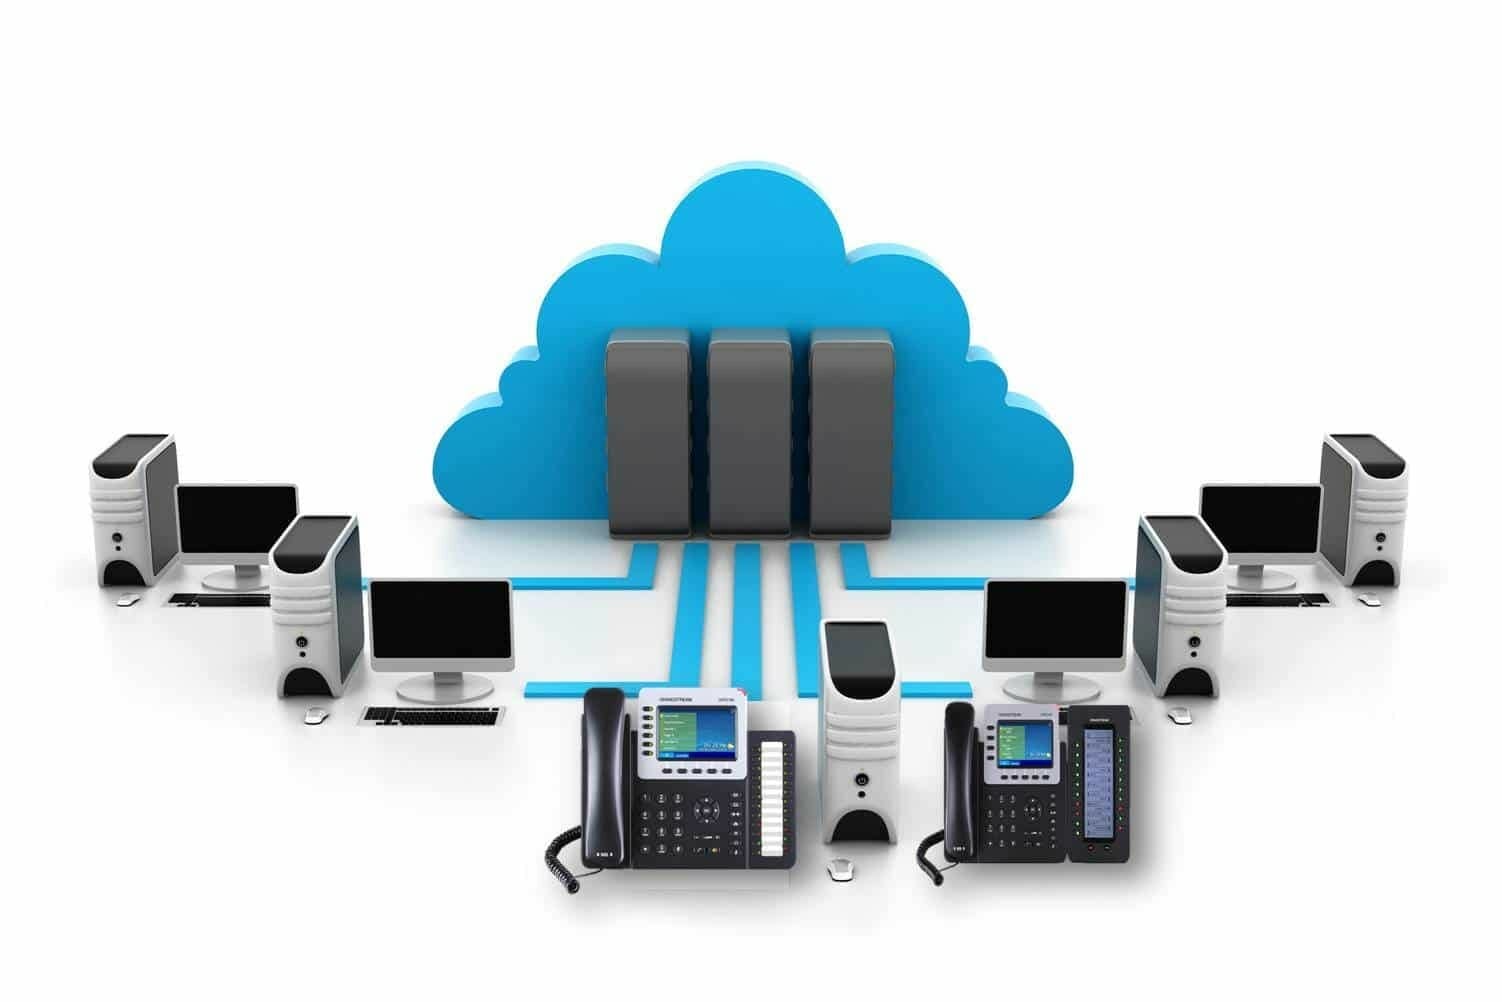 voip in the cloud